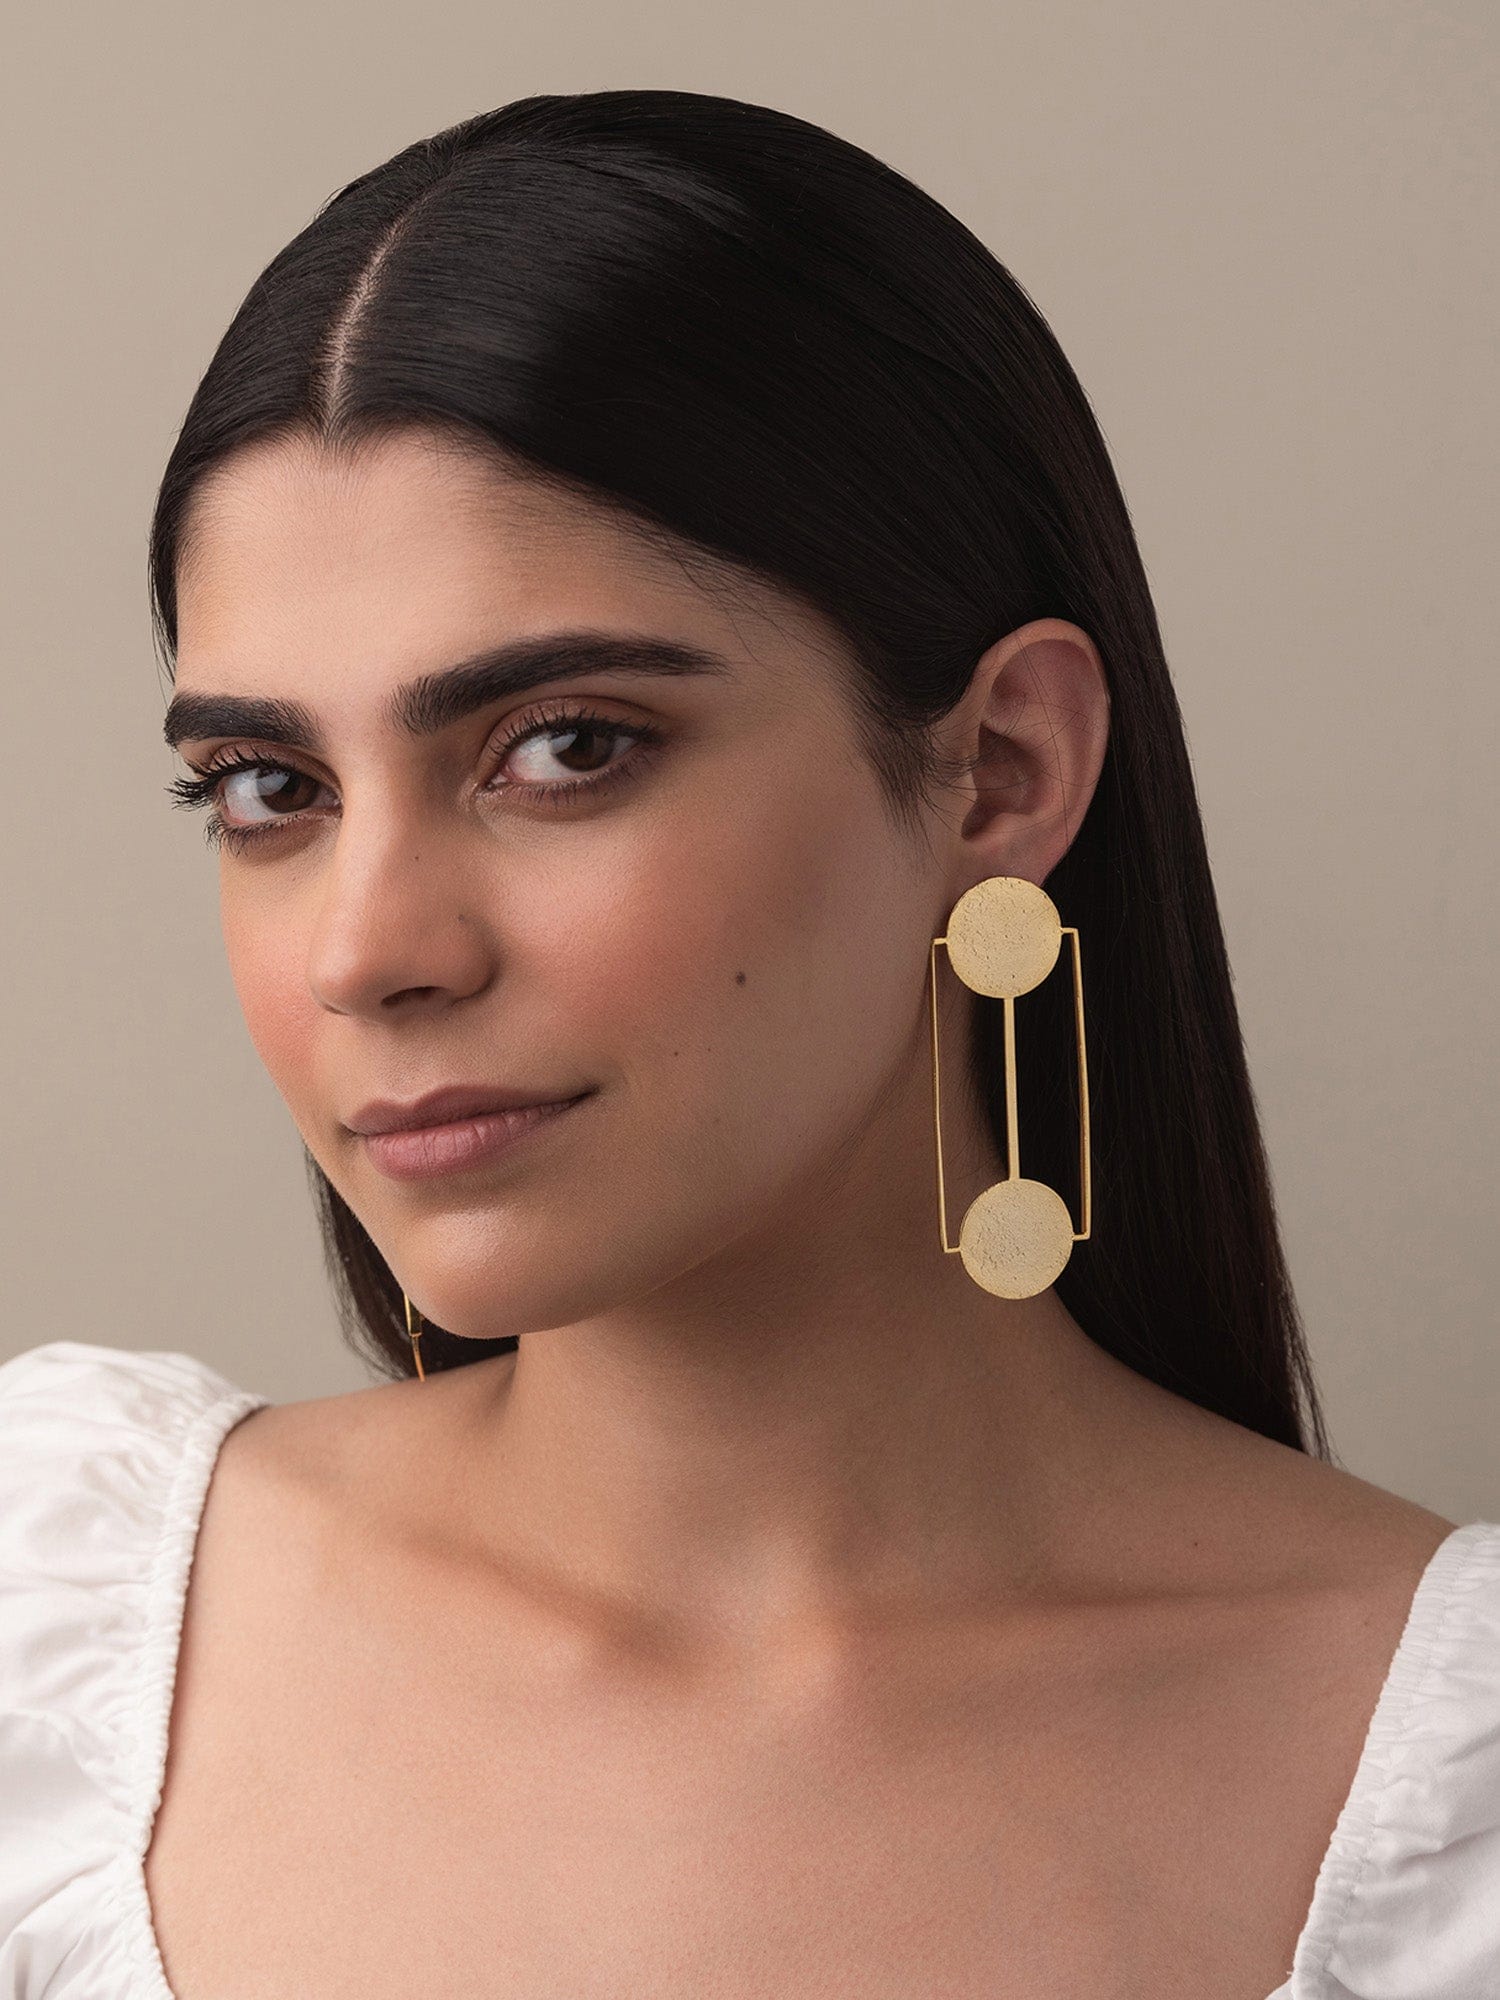 Mismatched earrings